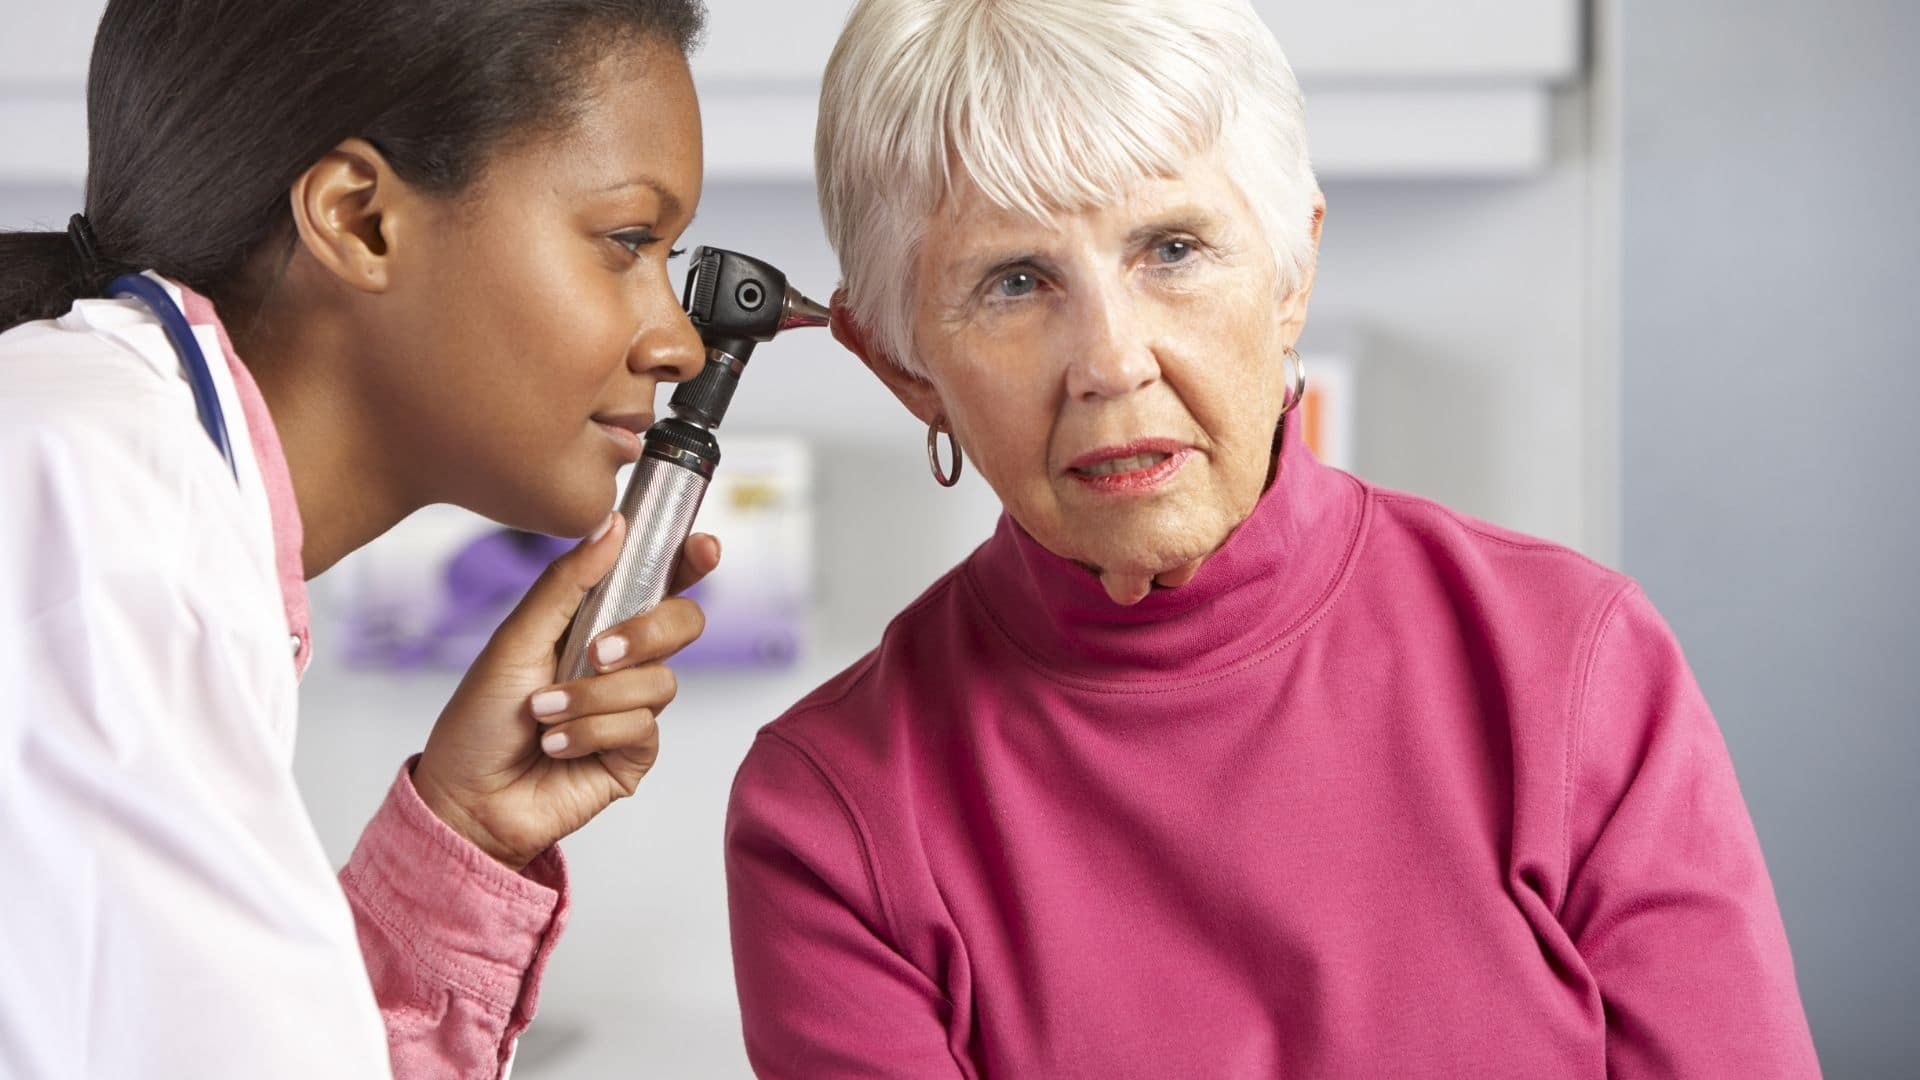 ENT Specialist caring for mature a patient as she examines her ears